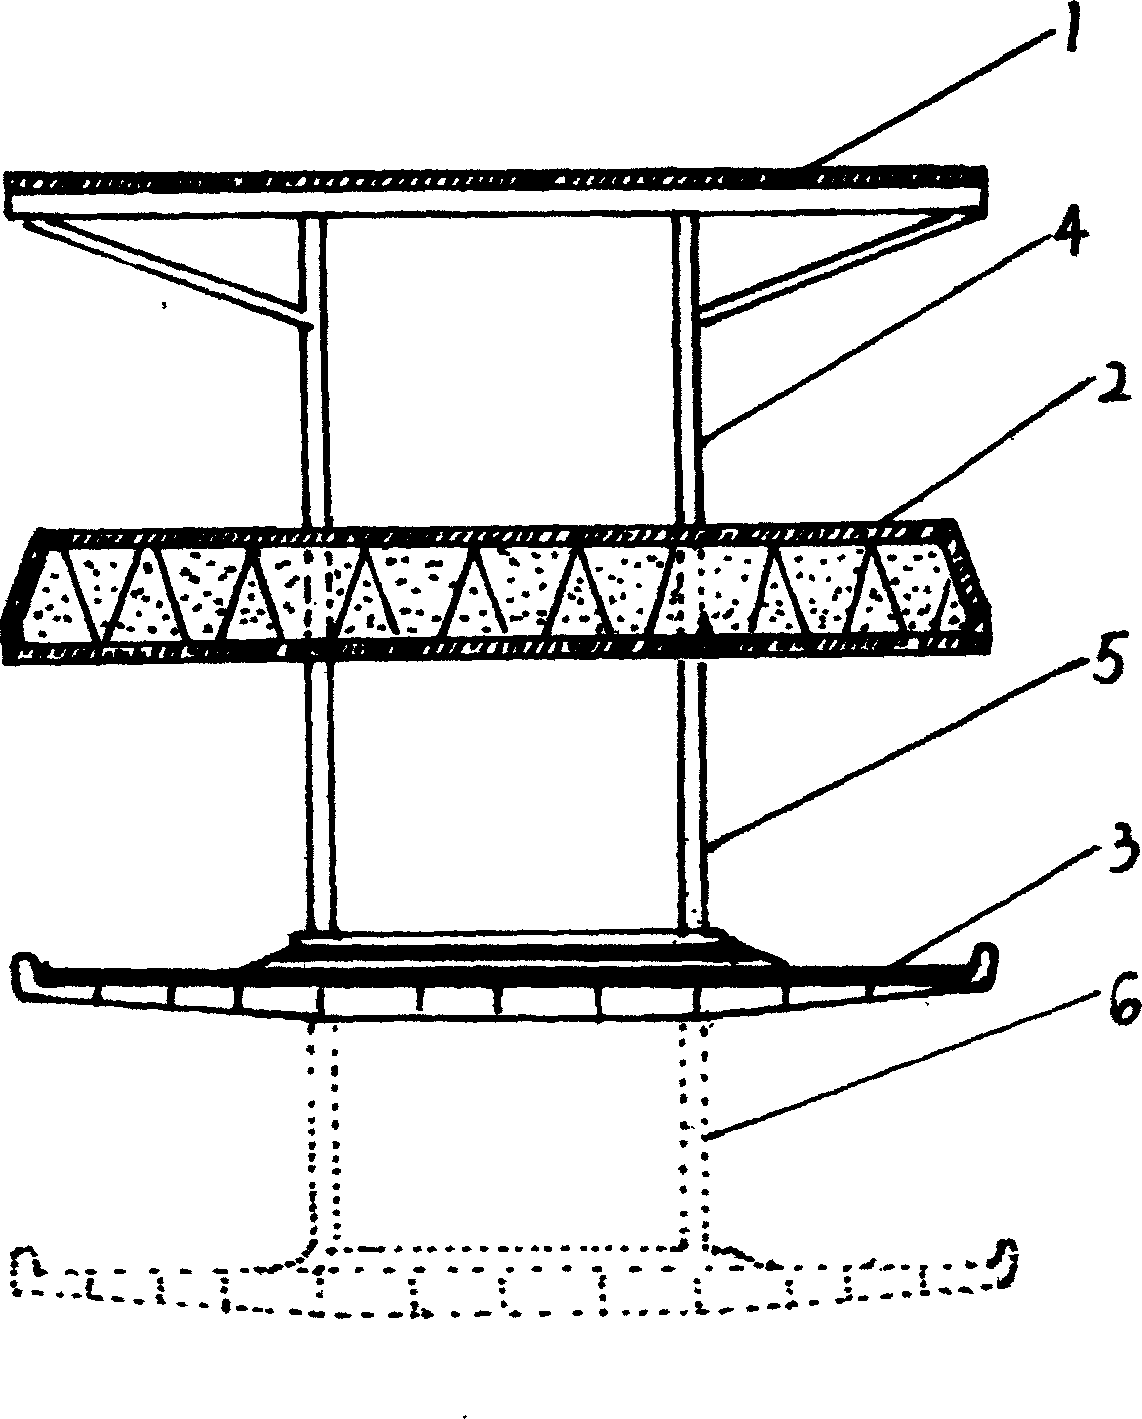 Floating structure with double bottoms